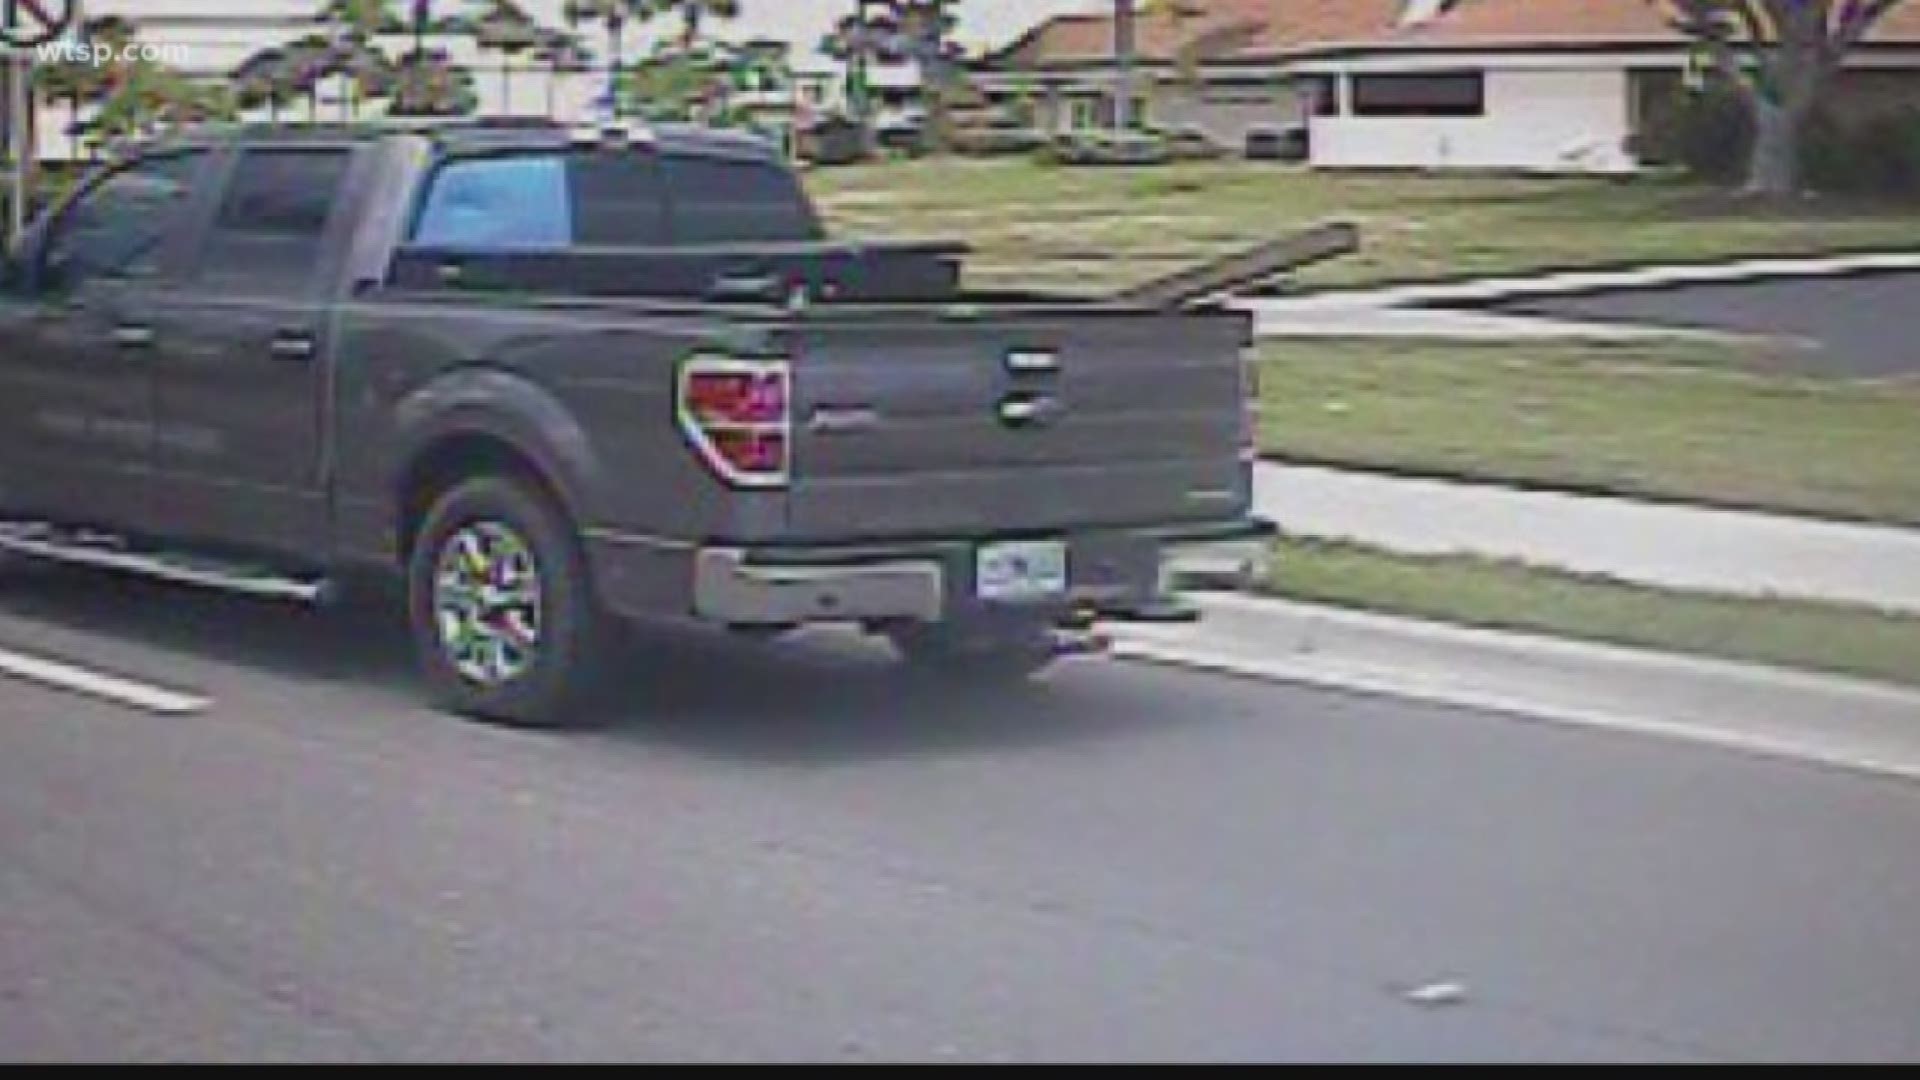 Deputies say the truck owner had their daughter’s ashes in an urn inside the truck when it was stolen. https://on.wtsp.com/2mdIEEH